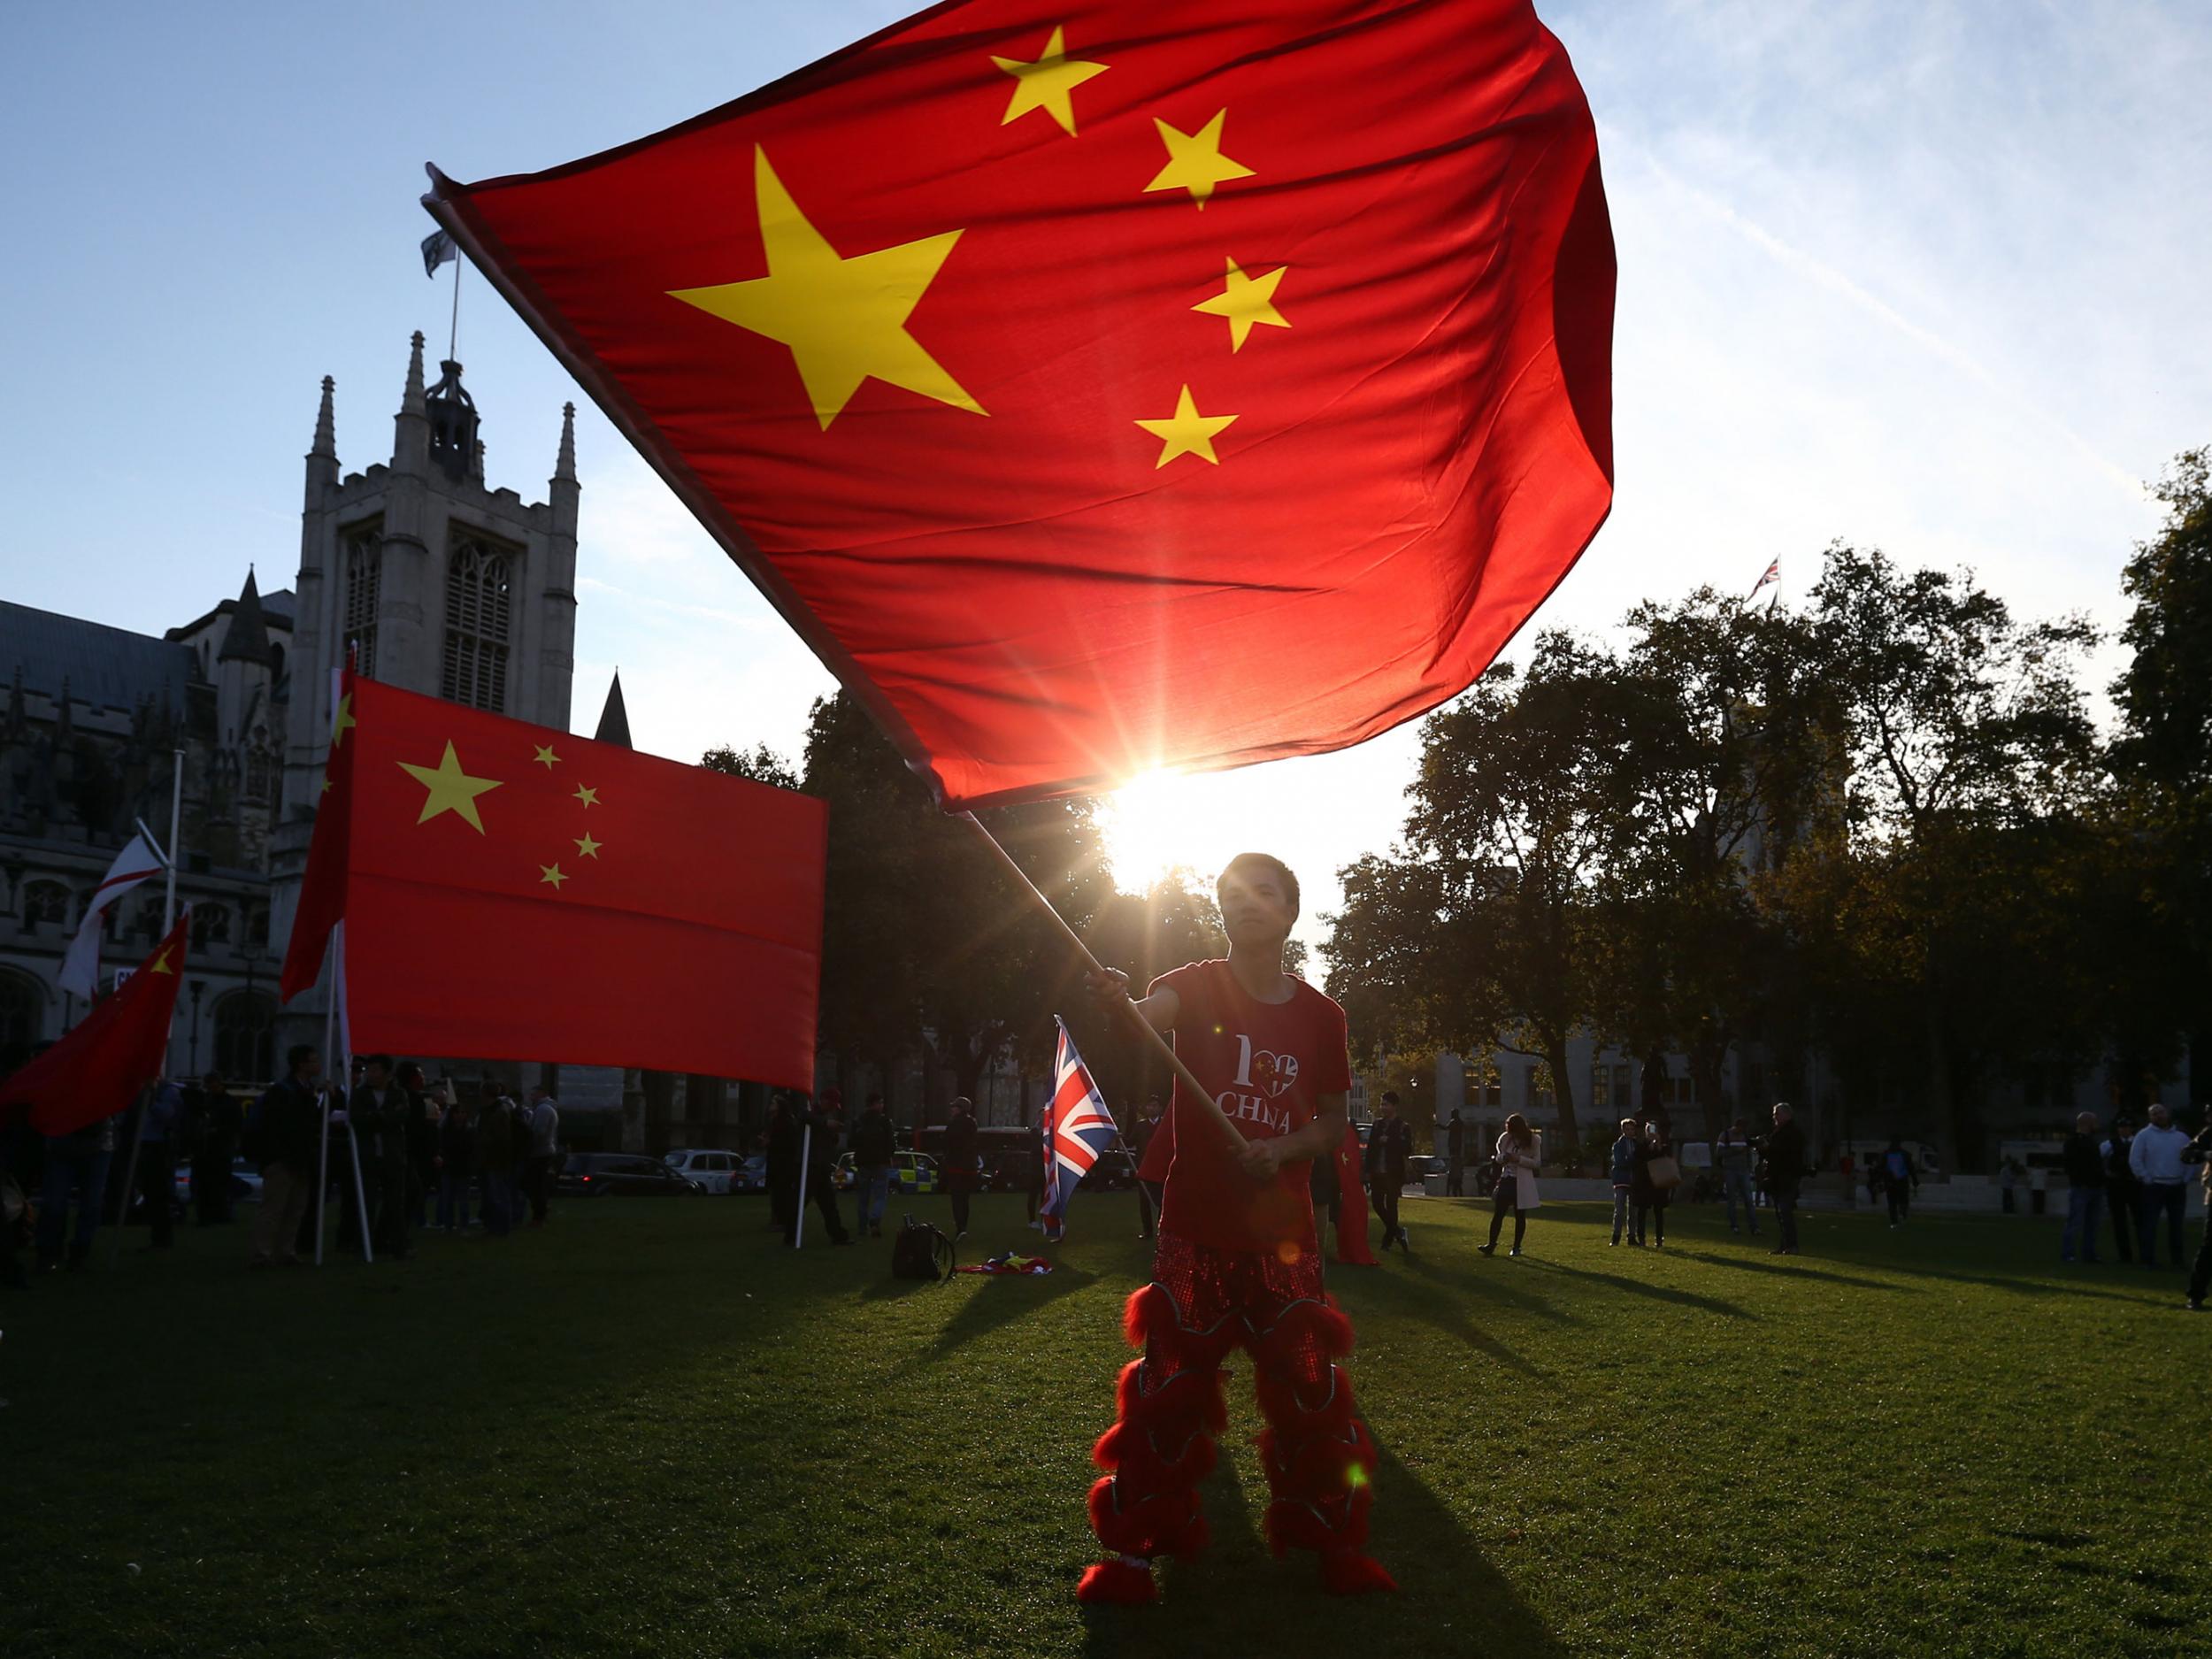 A pro-China activist waves a Chinese flag as he demonstrates near Parliament ahead of a visit by China's President, Xi Jinping on October 20, 2015 in London